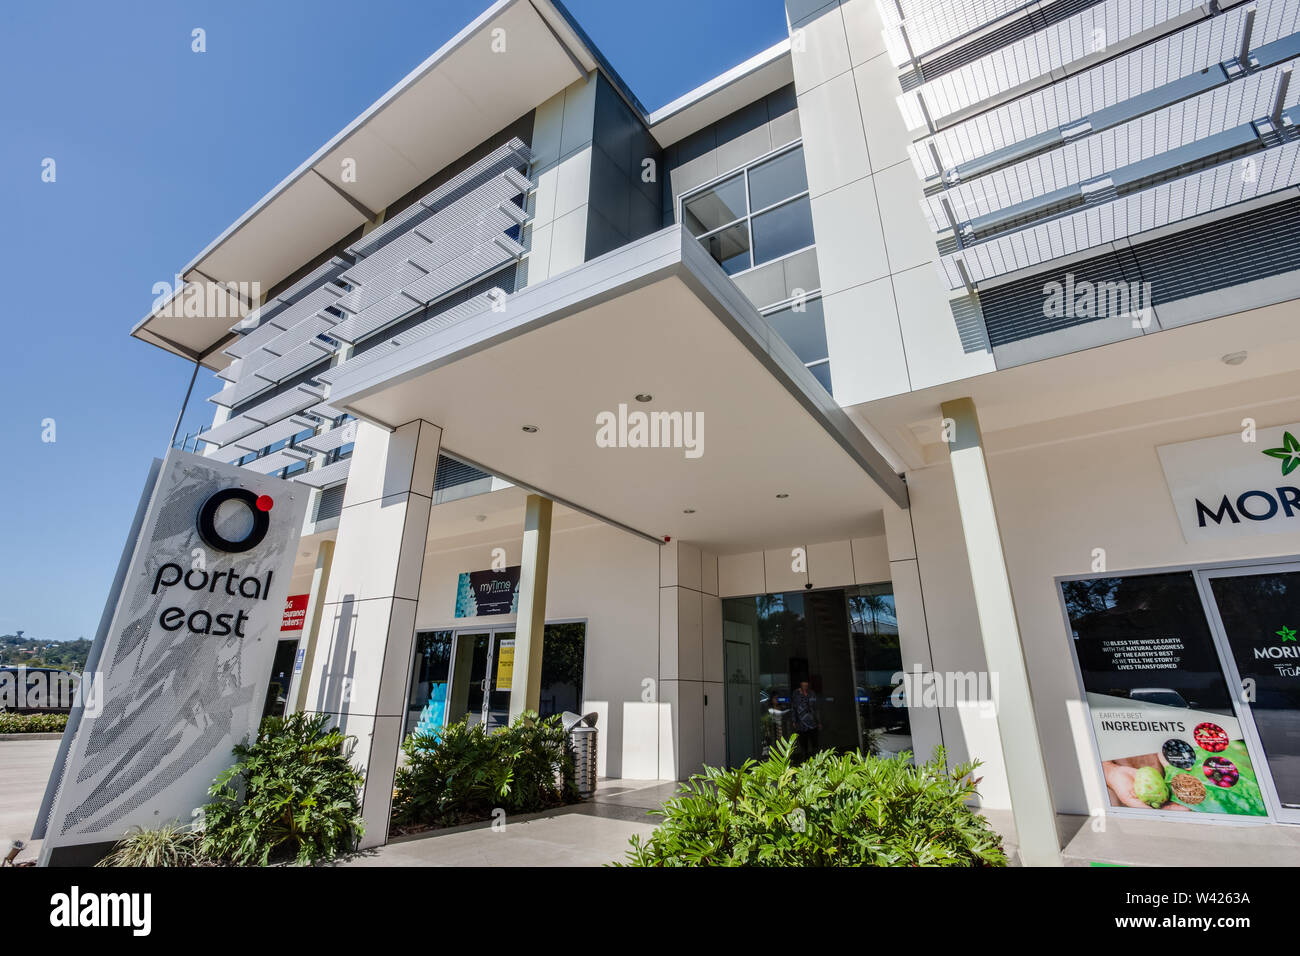 Stylish 4-storey building design with a covered entrance and a bolted logo of the company Portal East. Stock Photo